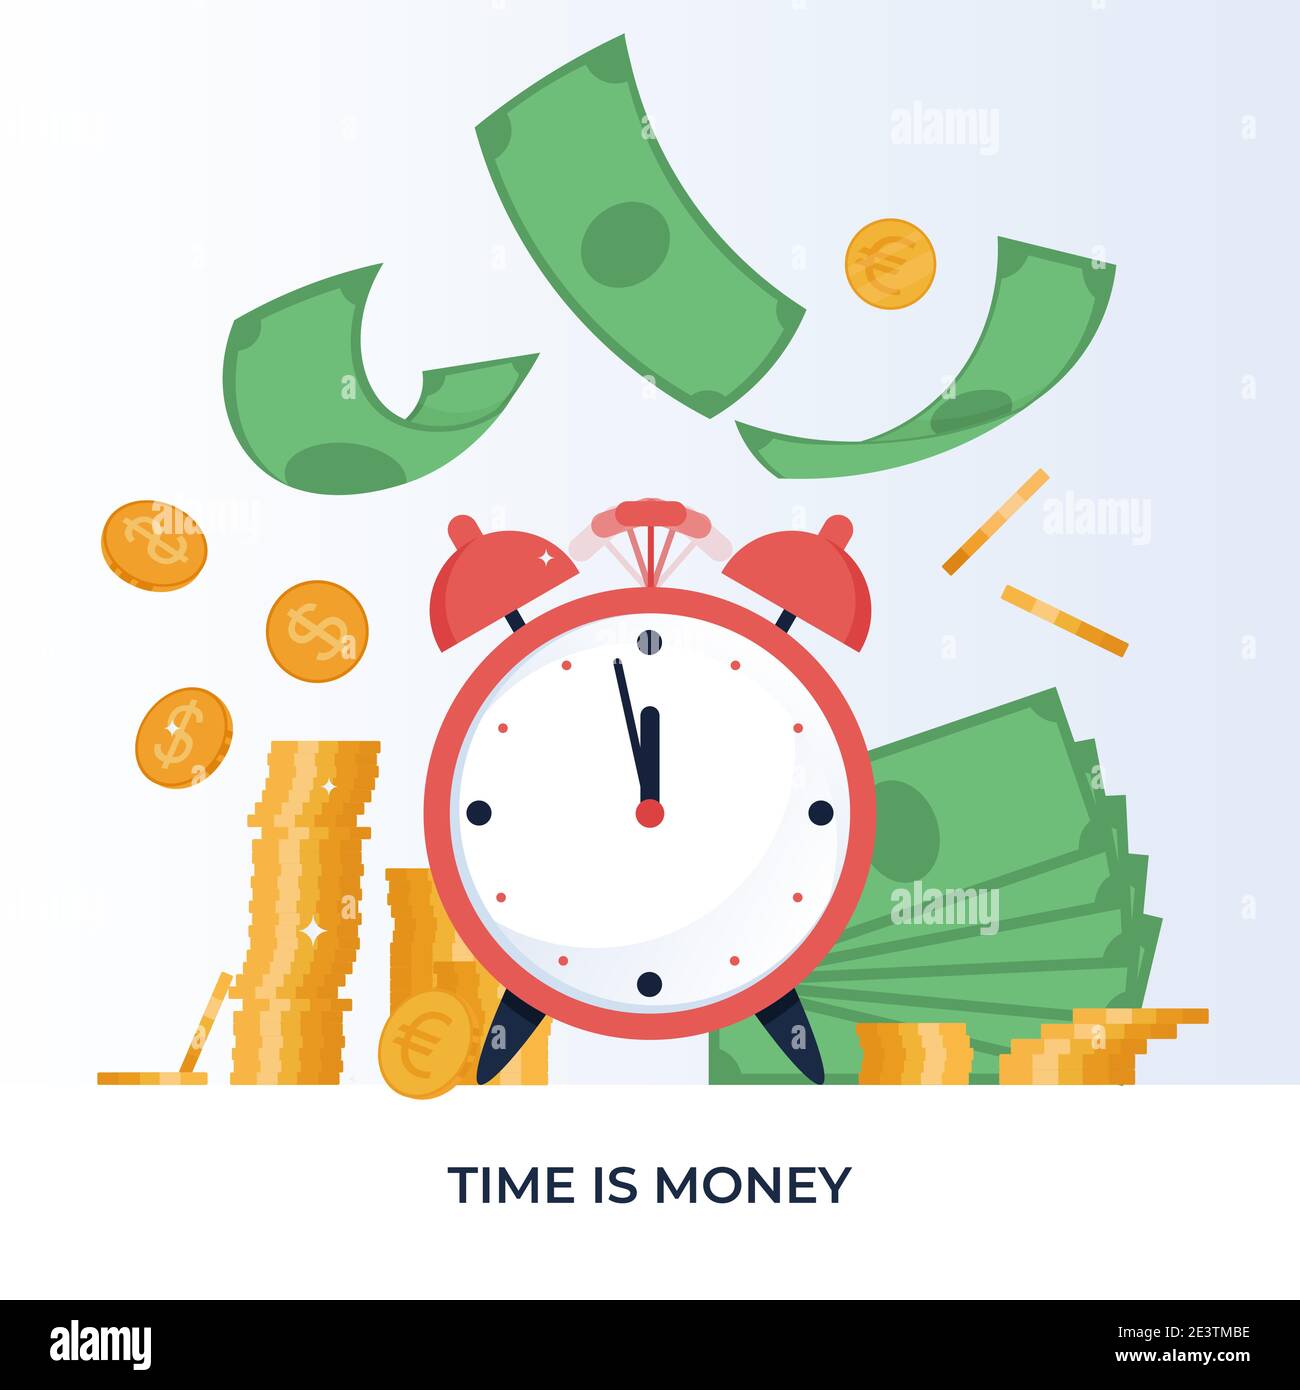 Time is money concept. Financial investments, income increase, budget management, savings account. Vector illustration in flat style Stock Vector